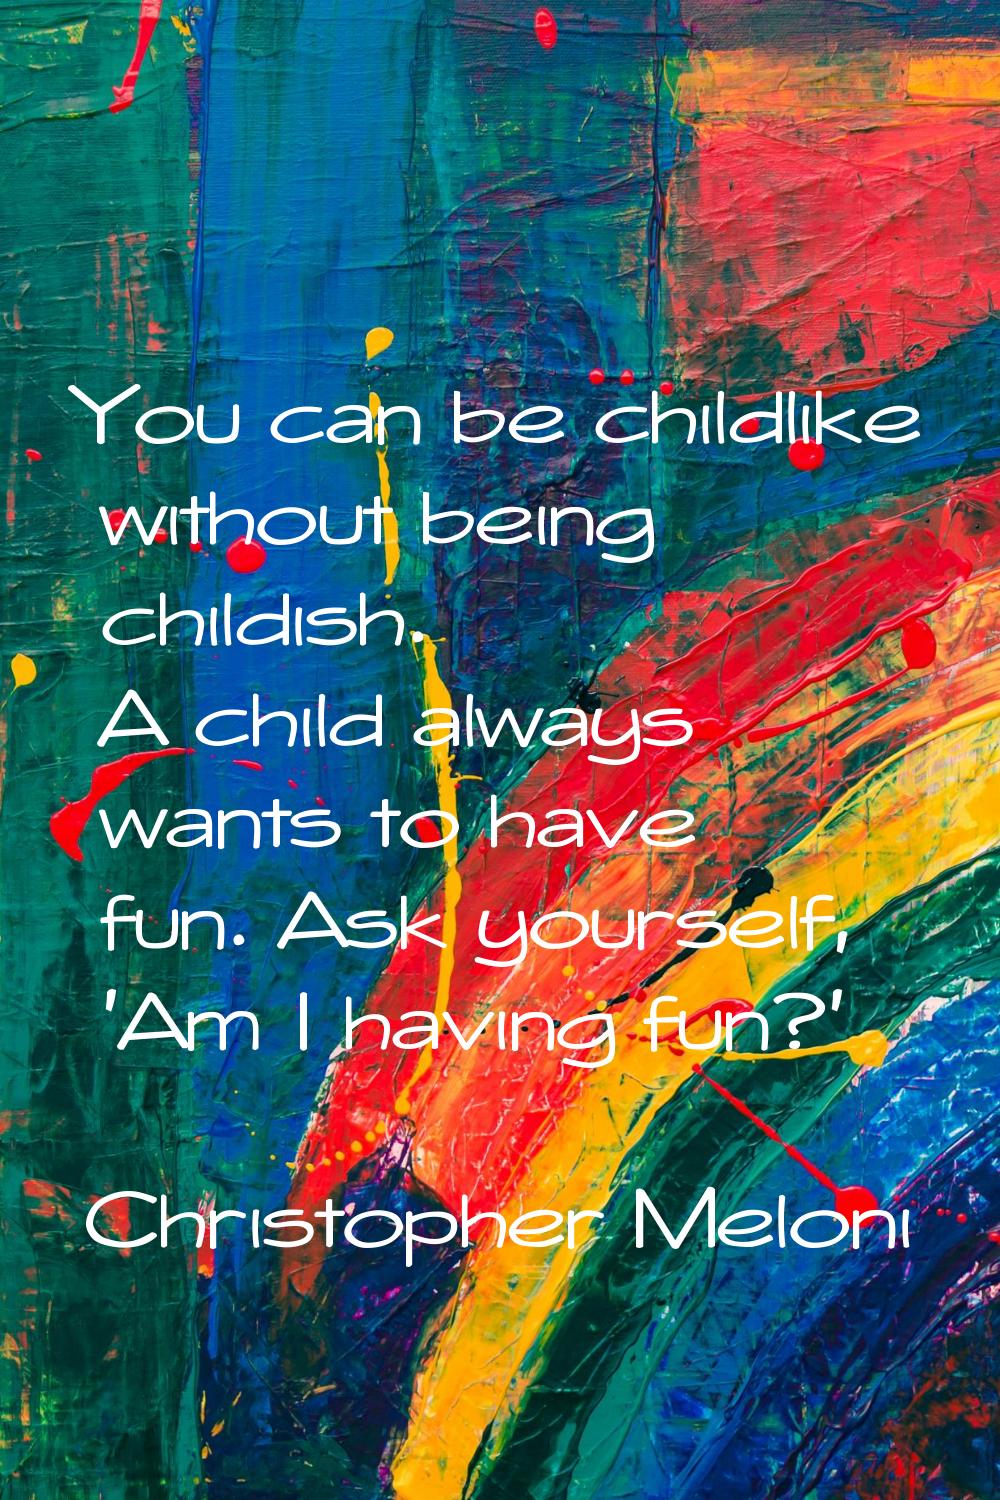 You can be childlike without being childish. A child always wants to have fun. Ask yourself, 'Am I 